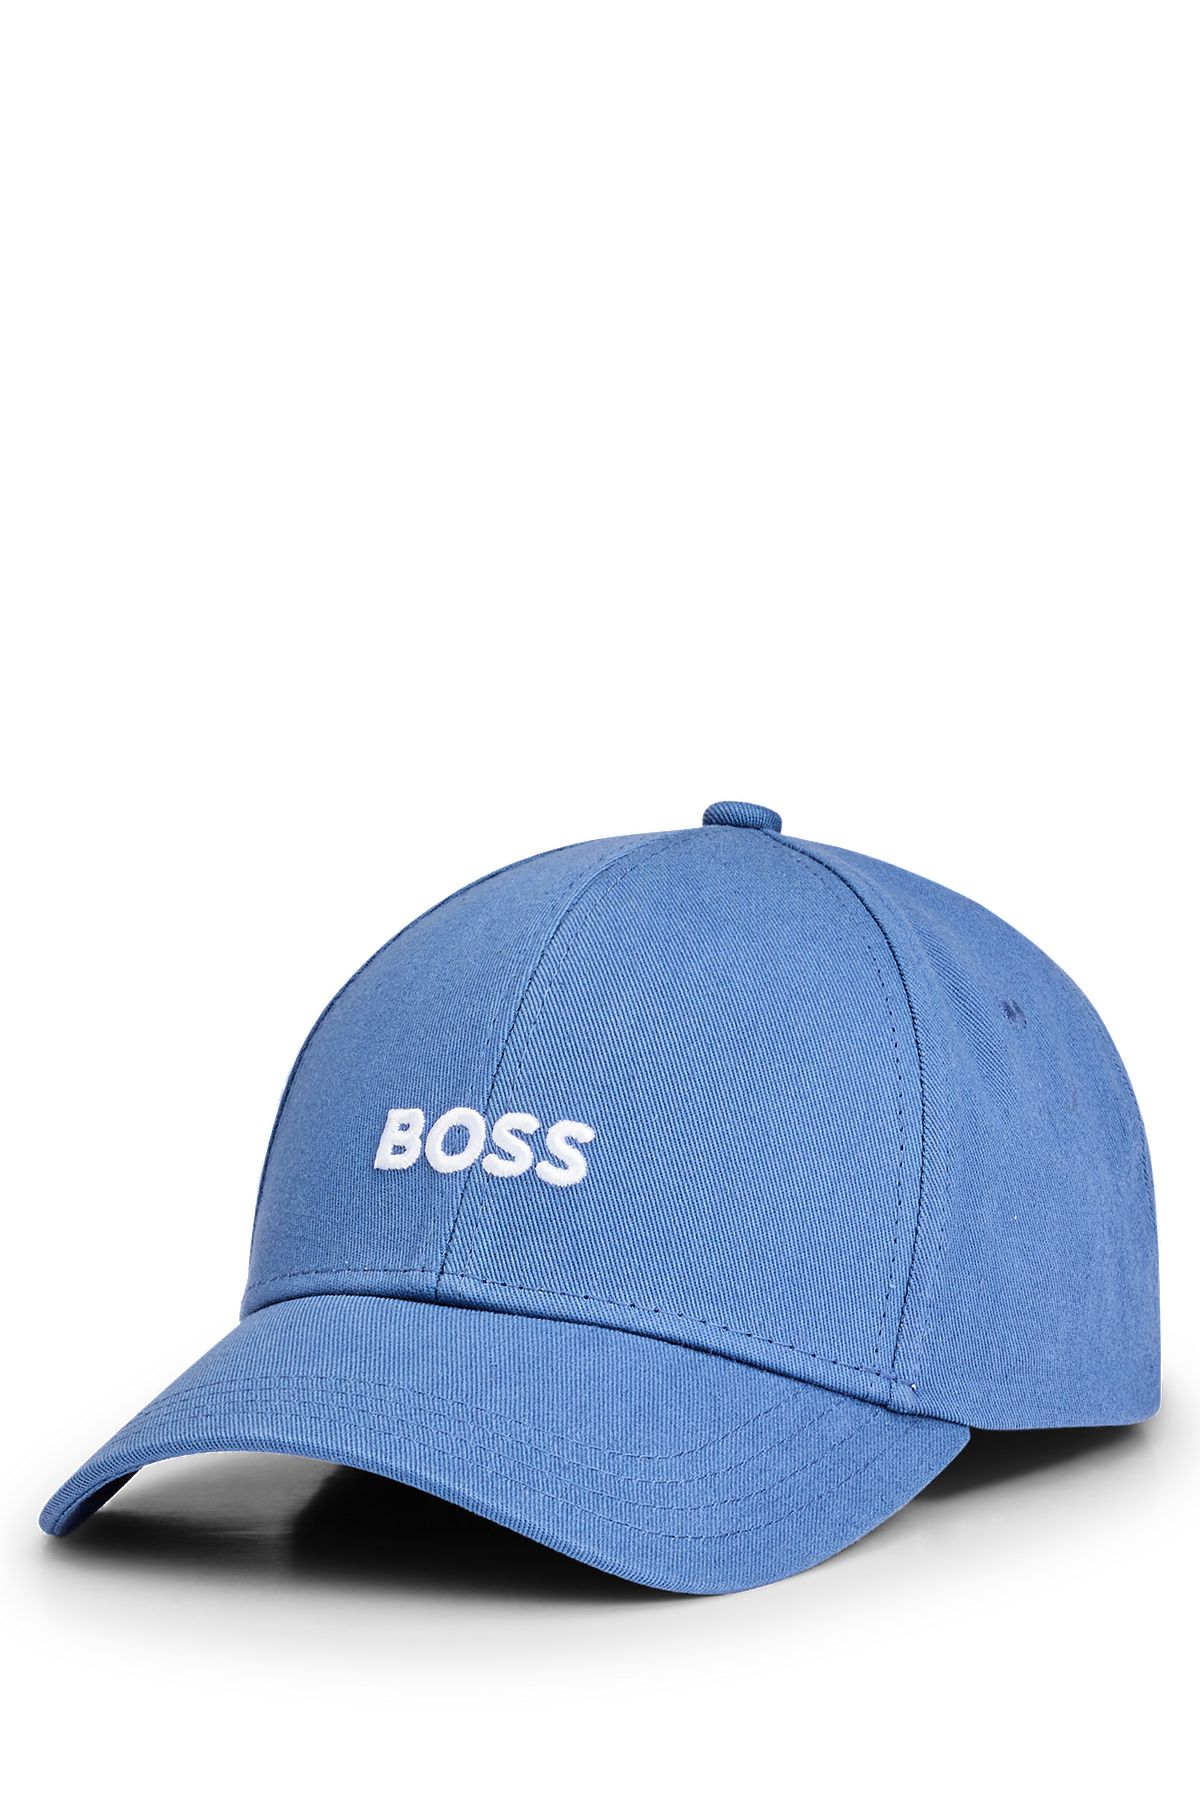 Men's Caps and Beanies by HUGO BOSS | Free Shipping